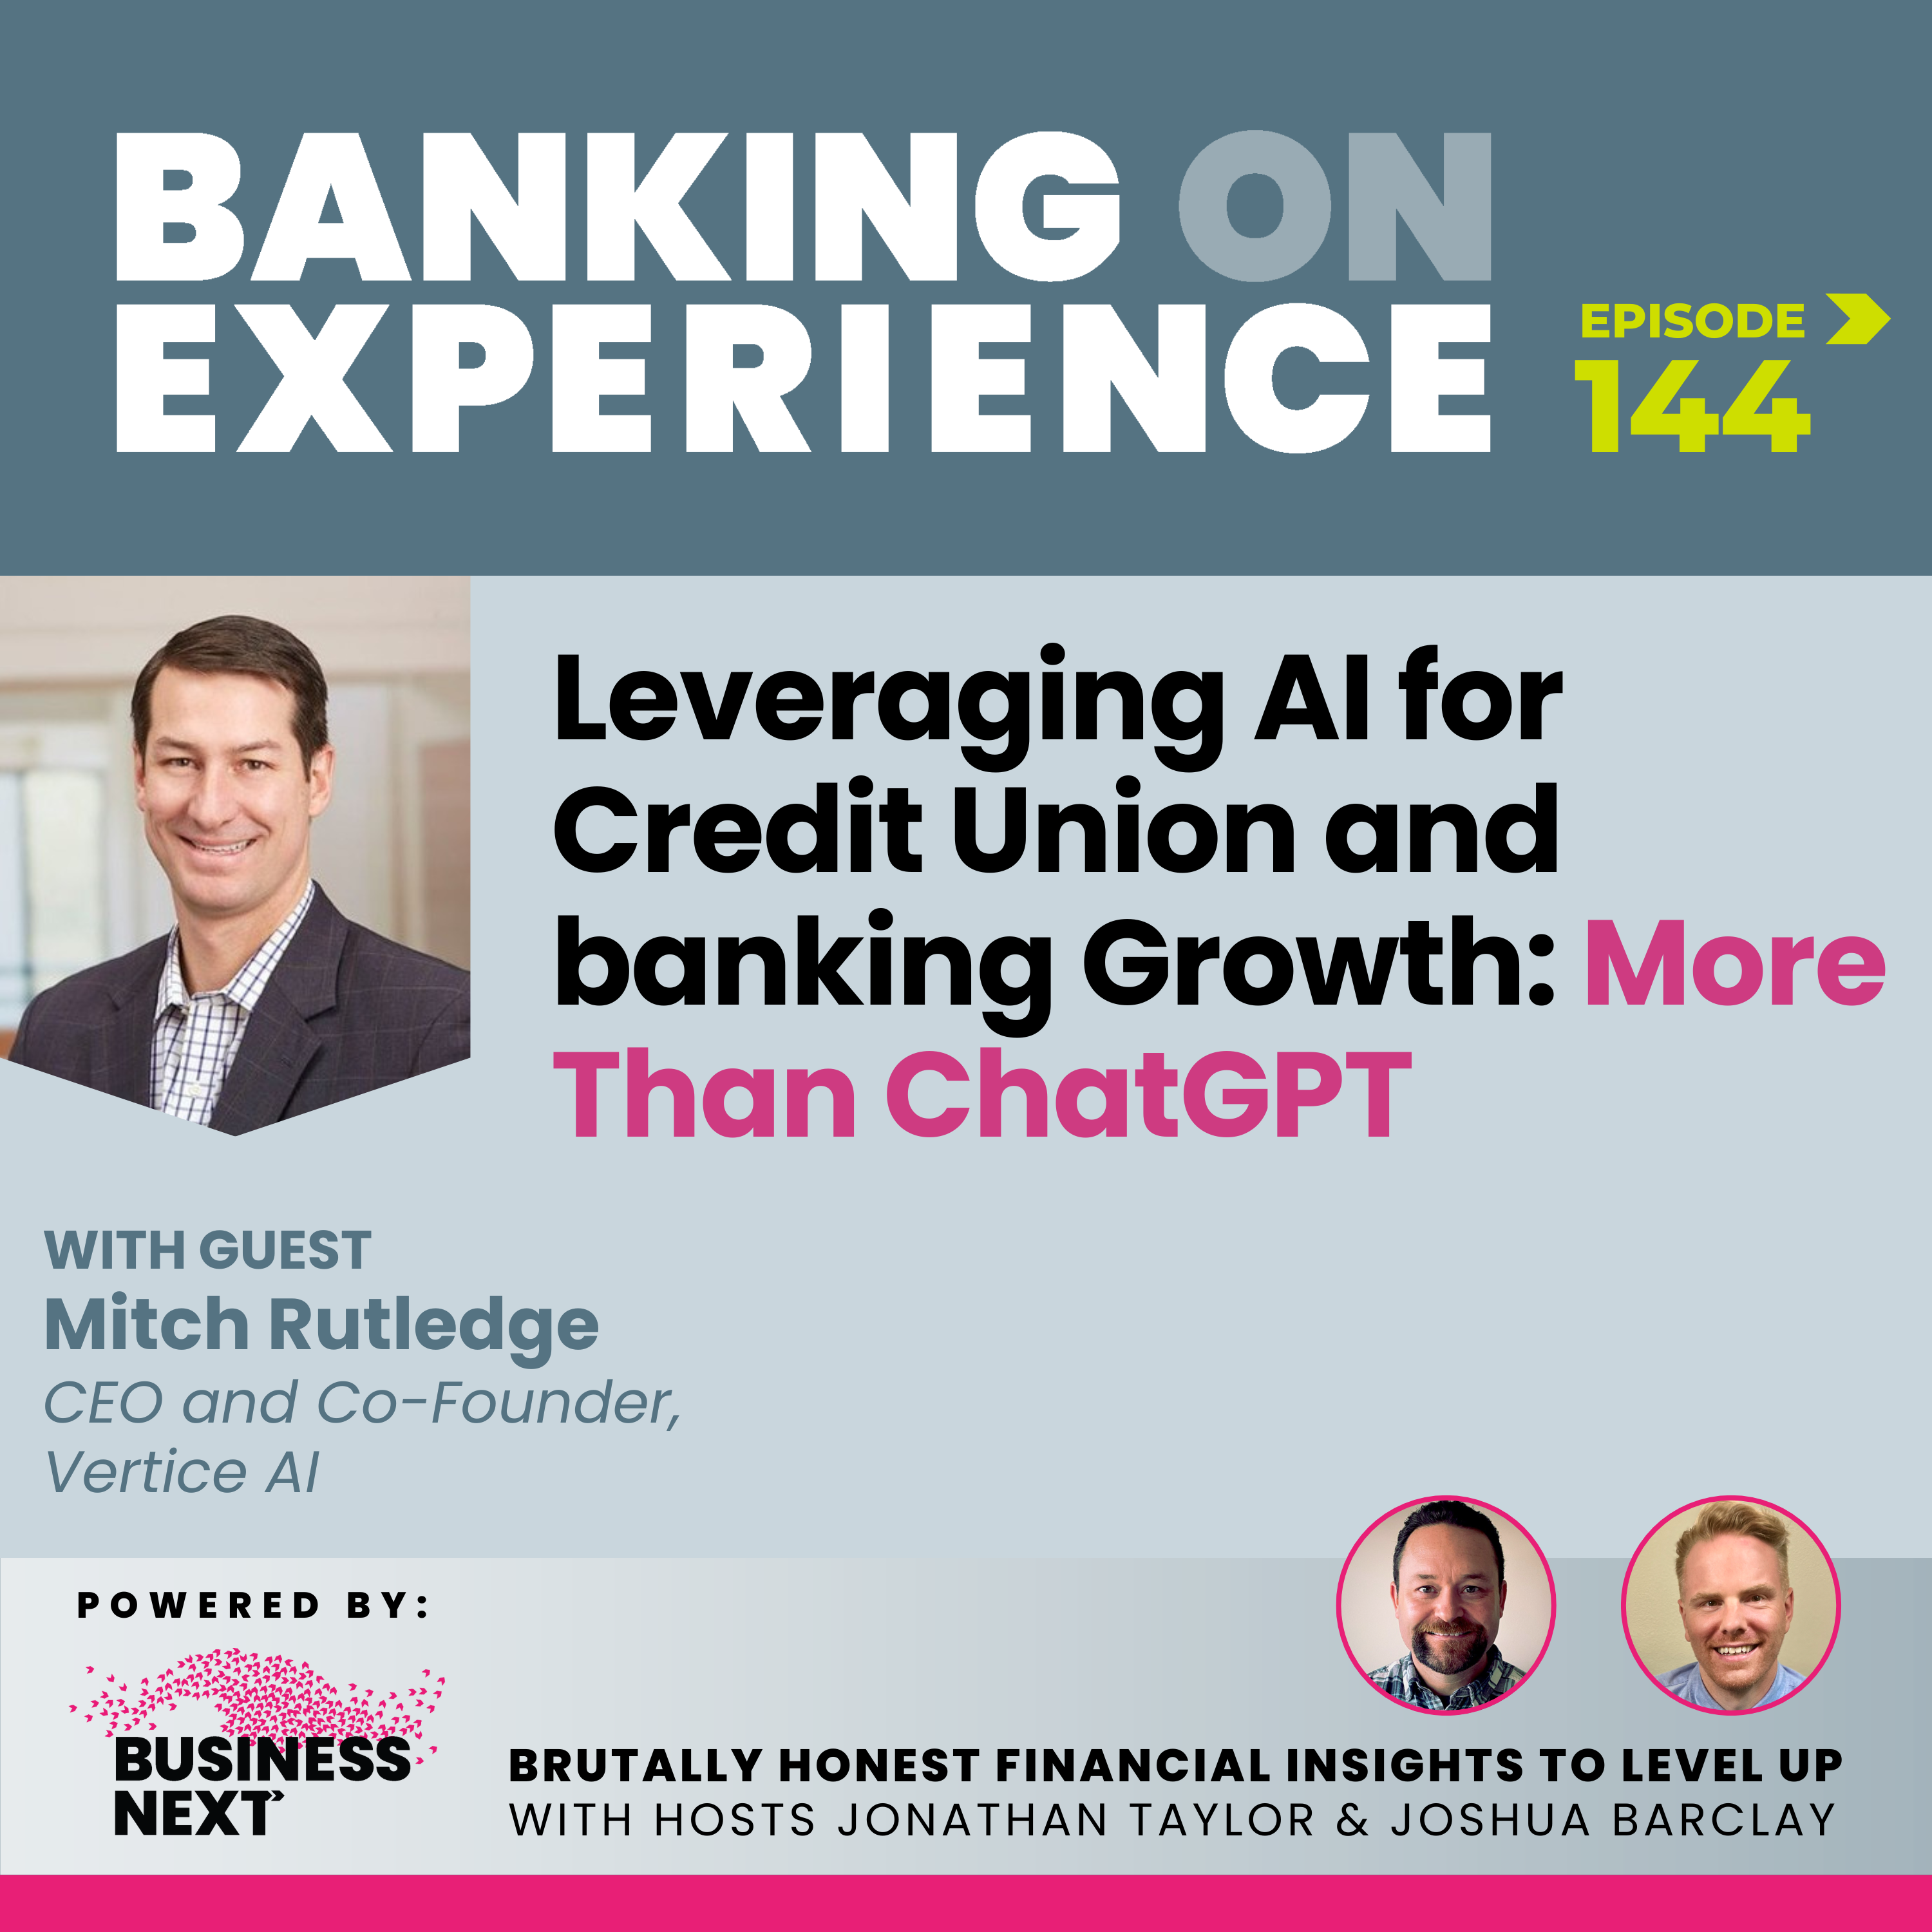 Leveraging AI for Credit Union and Banking Growth: More Than ChatGPT